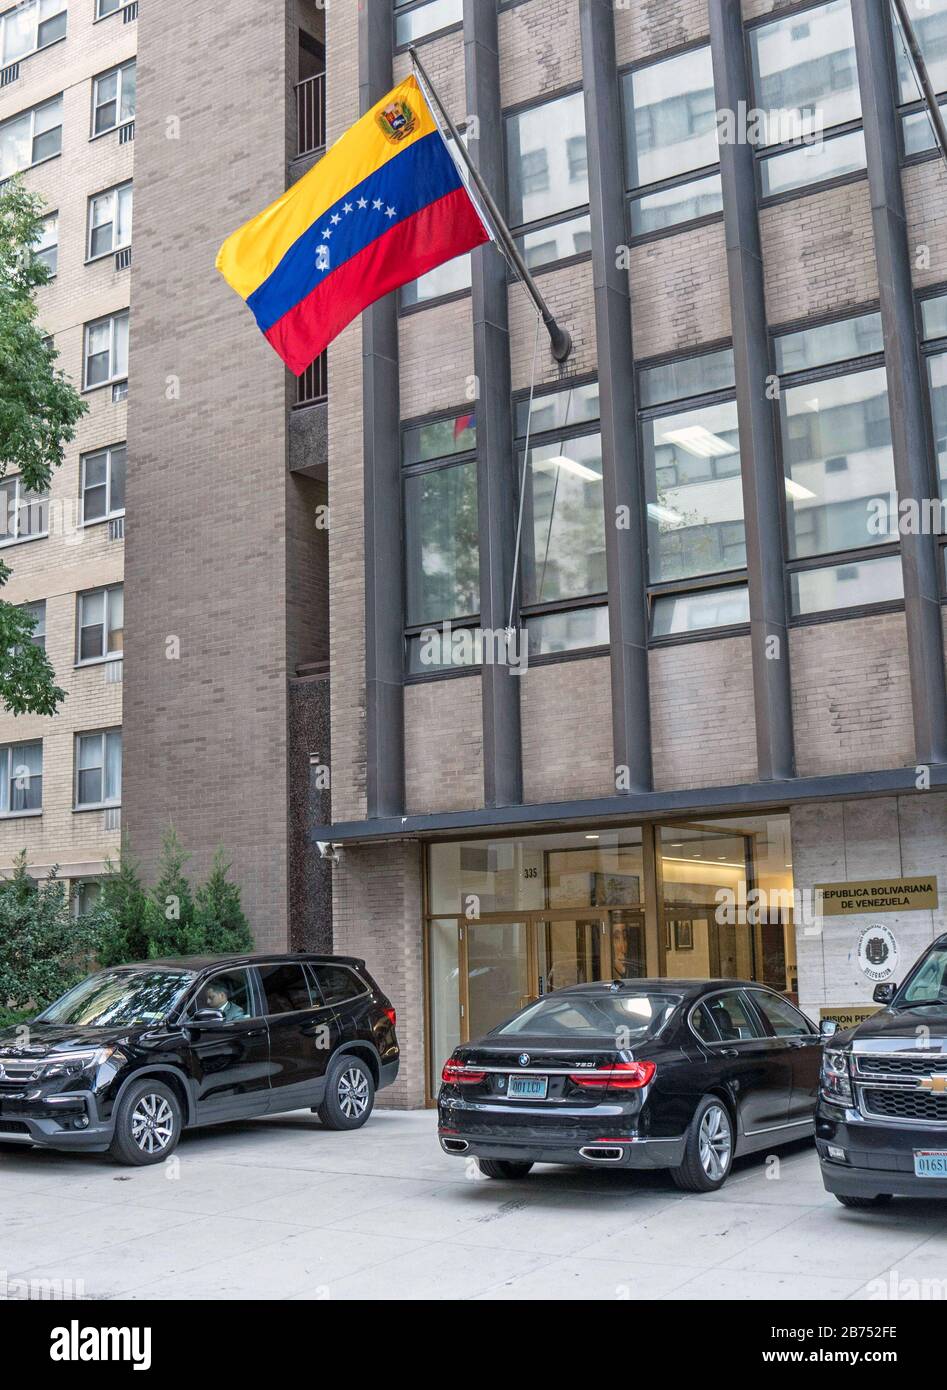 USA, New York, 27.09.2019. United Nations climate summit in New York, USA, 27.09.2019. Permanent representation of Venezuela near the headquarters of the United Nations in New York City [automated translation] Stock Photo